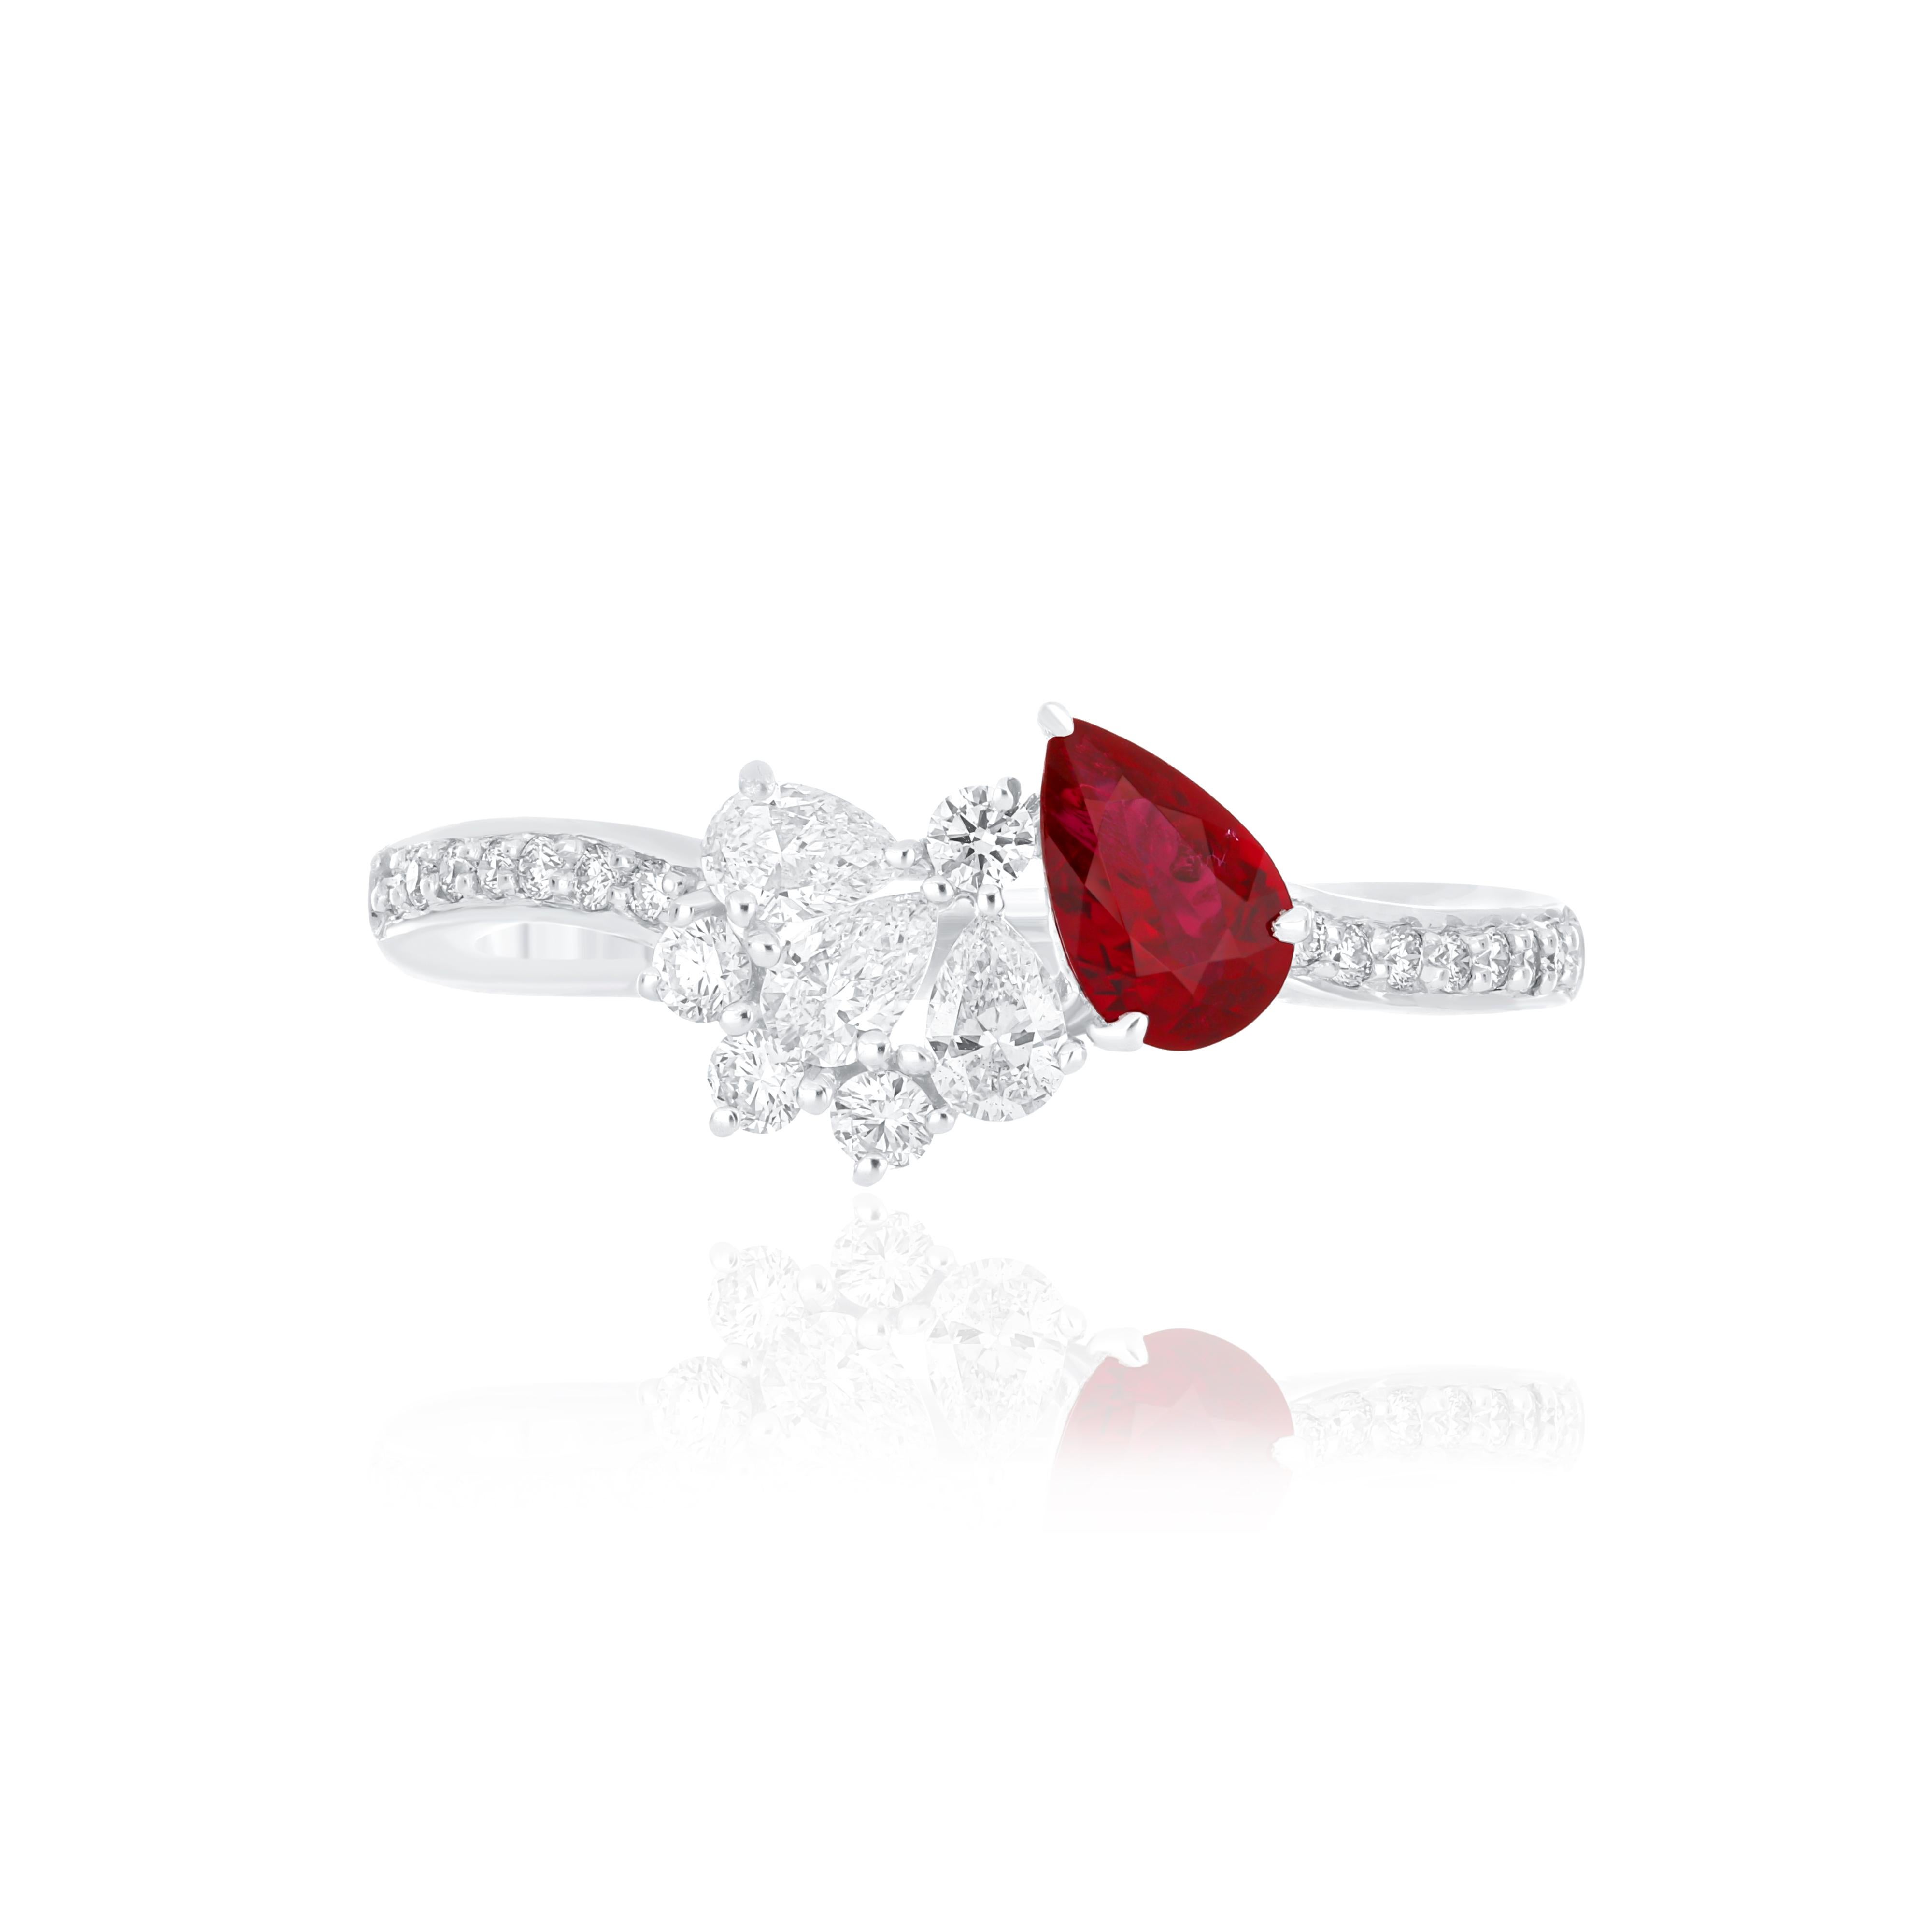 Elegant and exquisitely detailed 18 Karat White Gold Ring, center set with 0.36 CT's .Pear Shape Ruby Mozambique and micro pave set Diamonds, weighing approx. 0.40 Cts Beautifully Hand crafted in 18 Karat White Gold.

Stone Detail:
Ruby Mozambique: